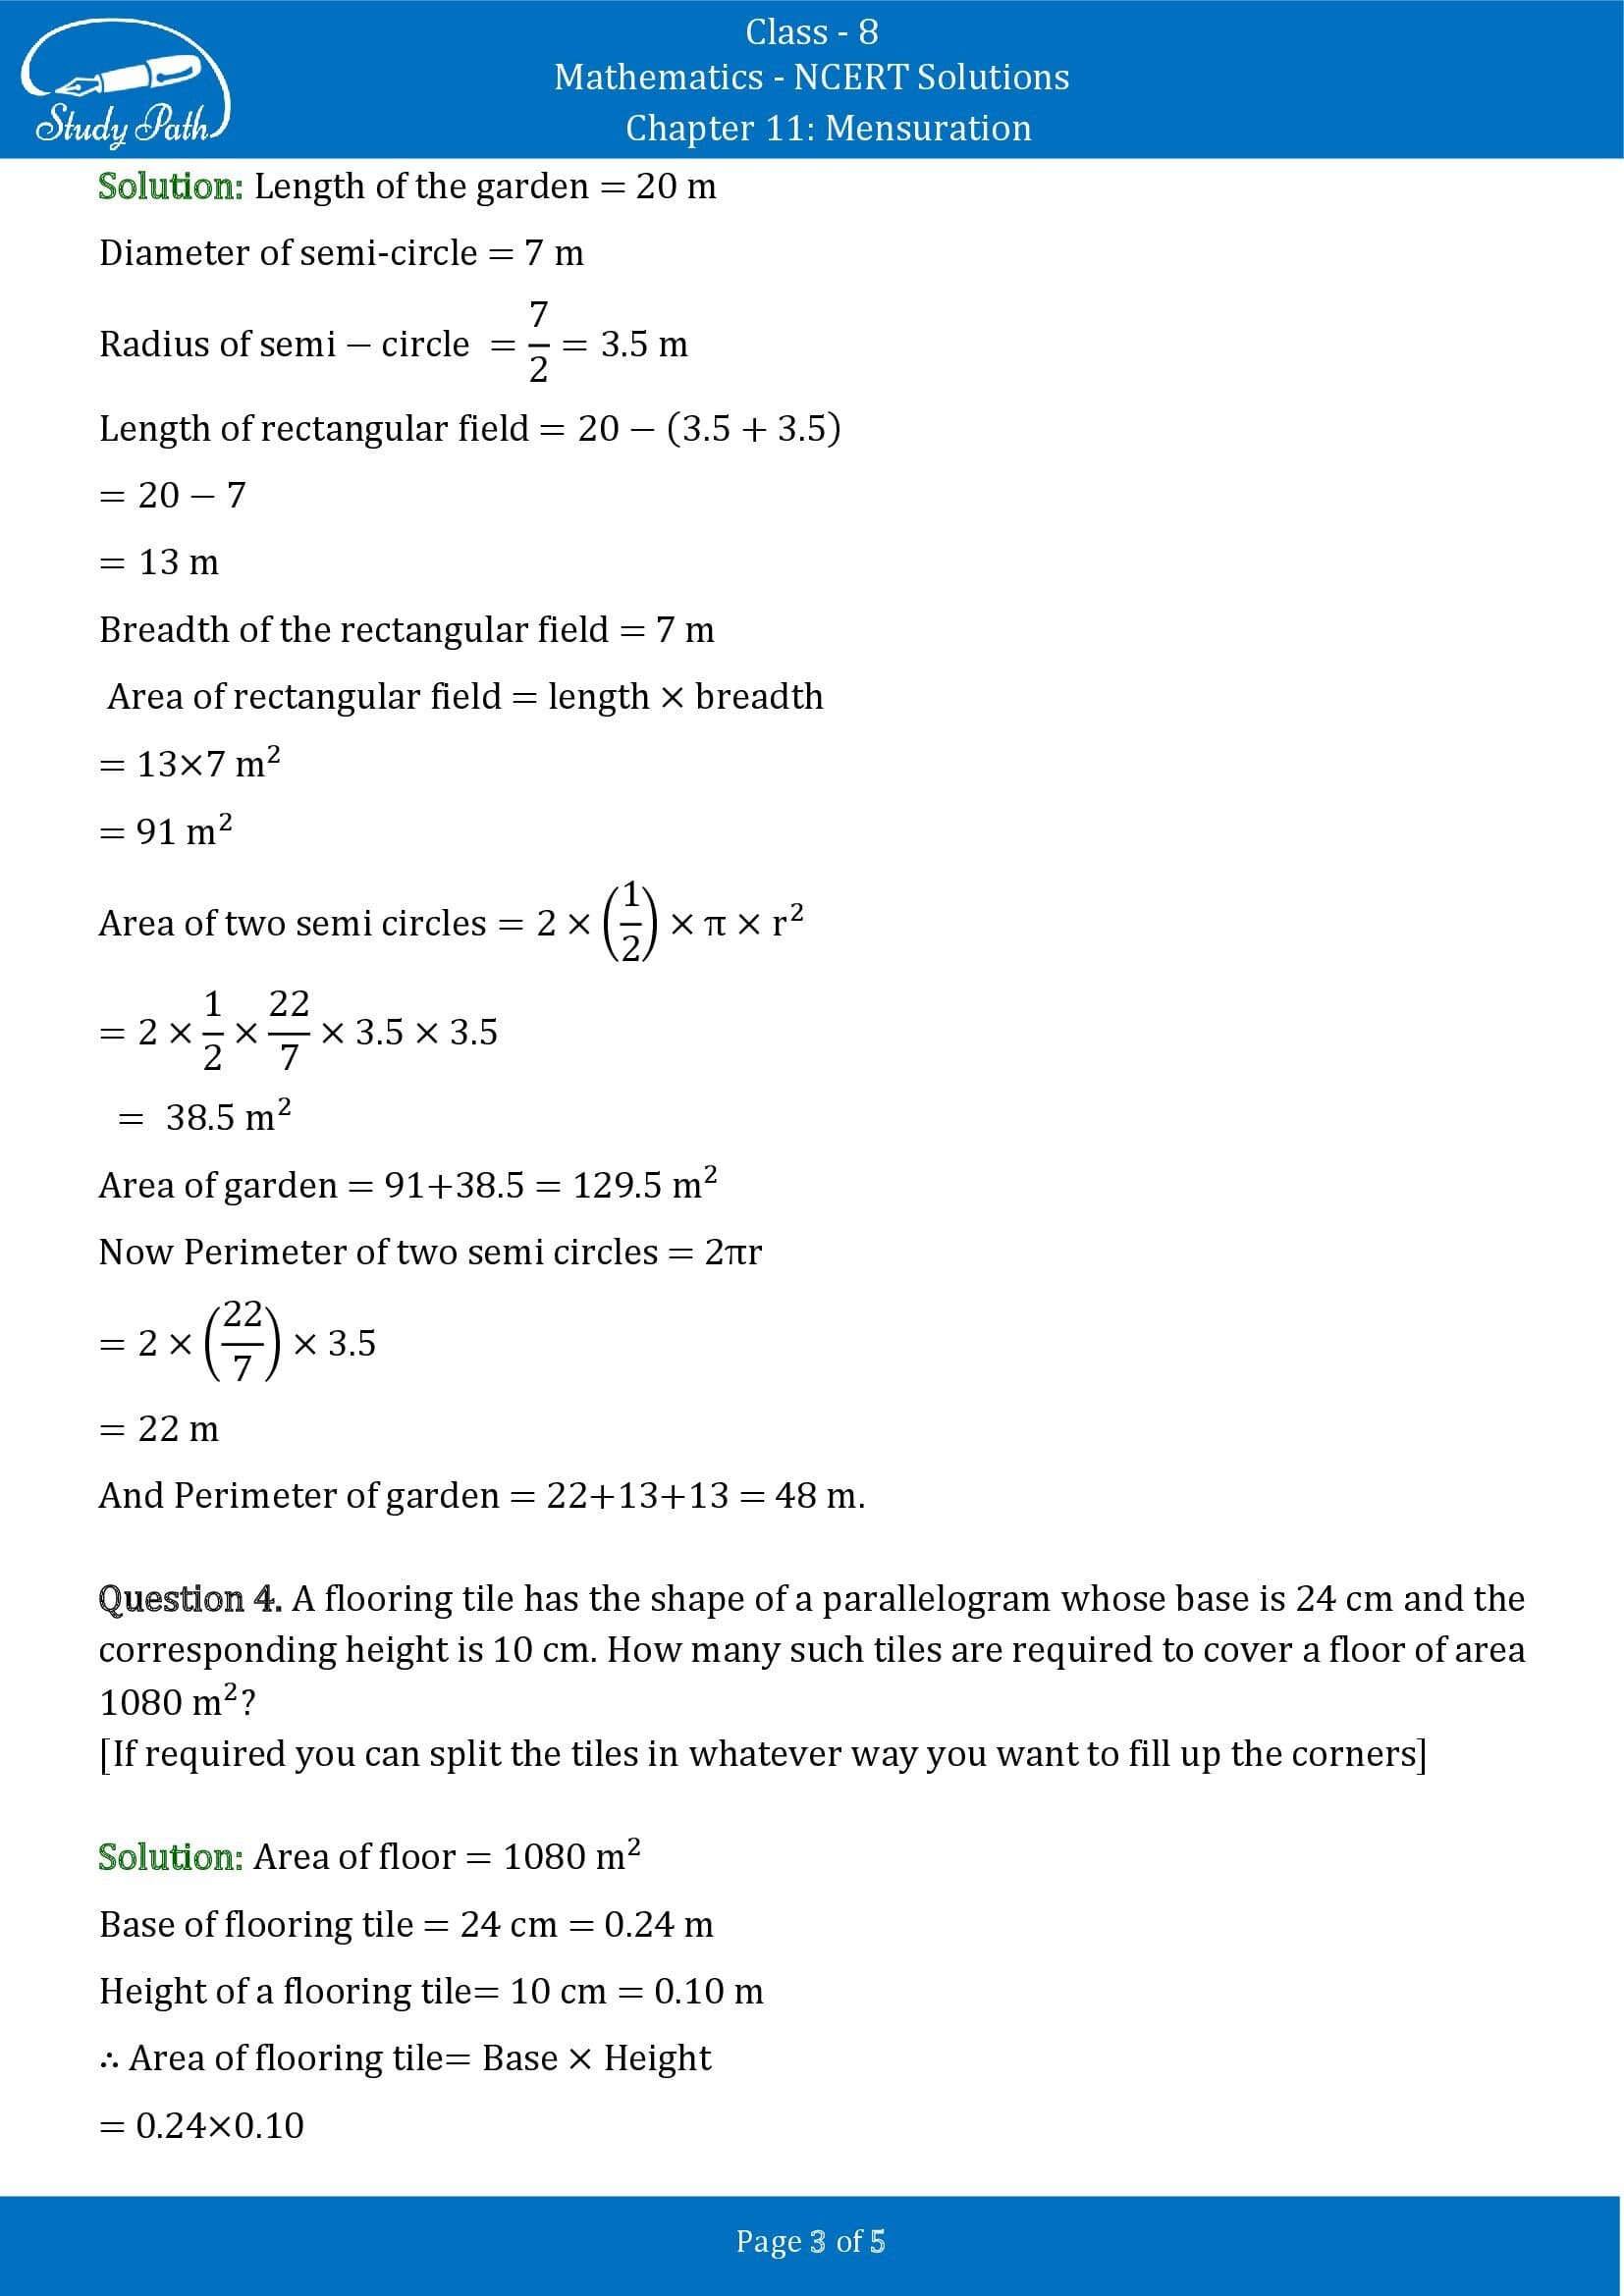 NCERT Solutions for Class 8 Maths Chapter 11 Mensuration Exercise 11.1 00003